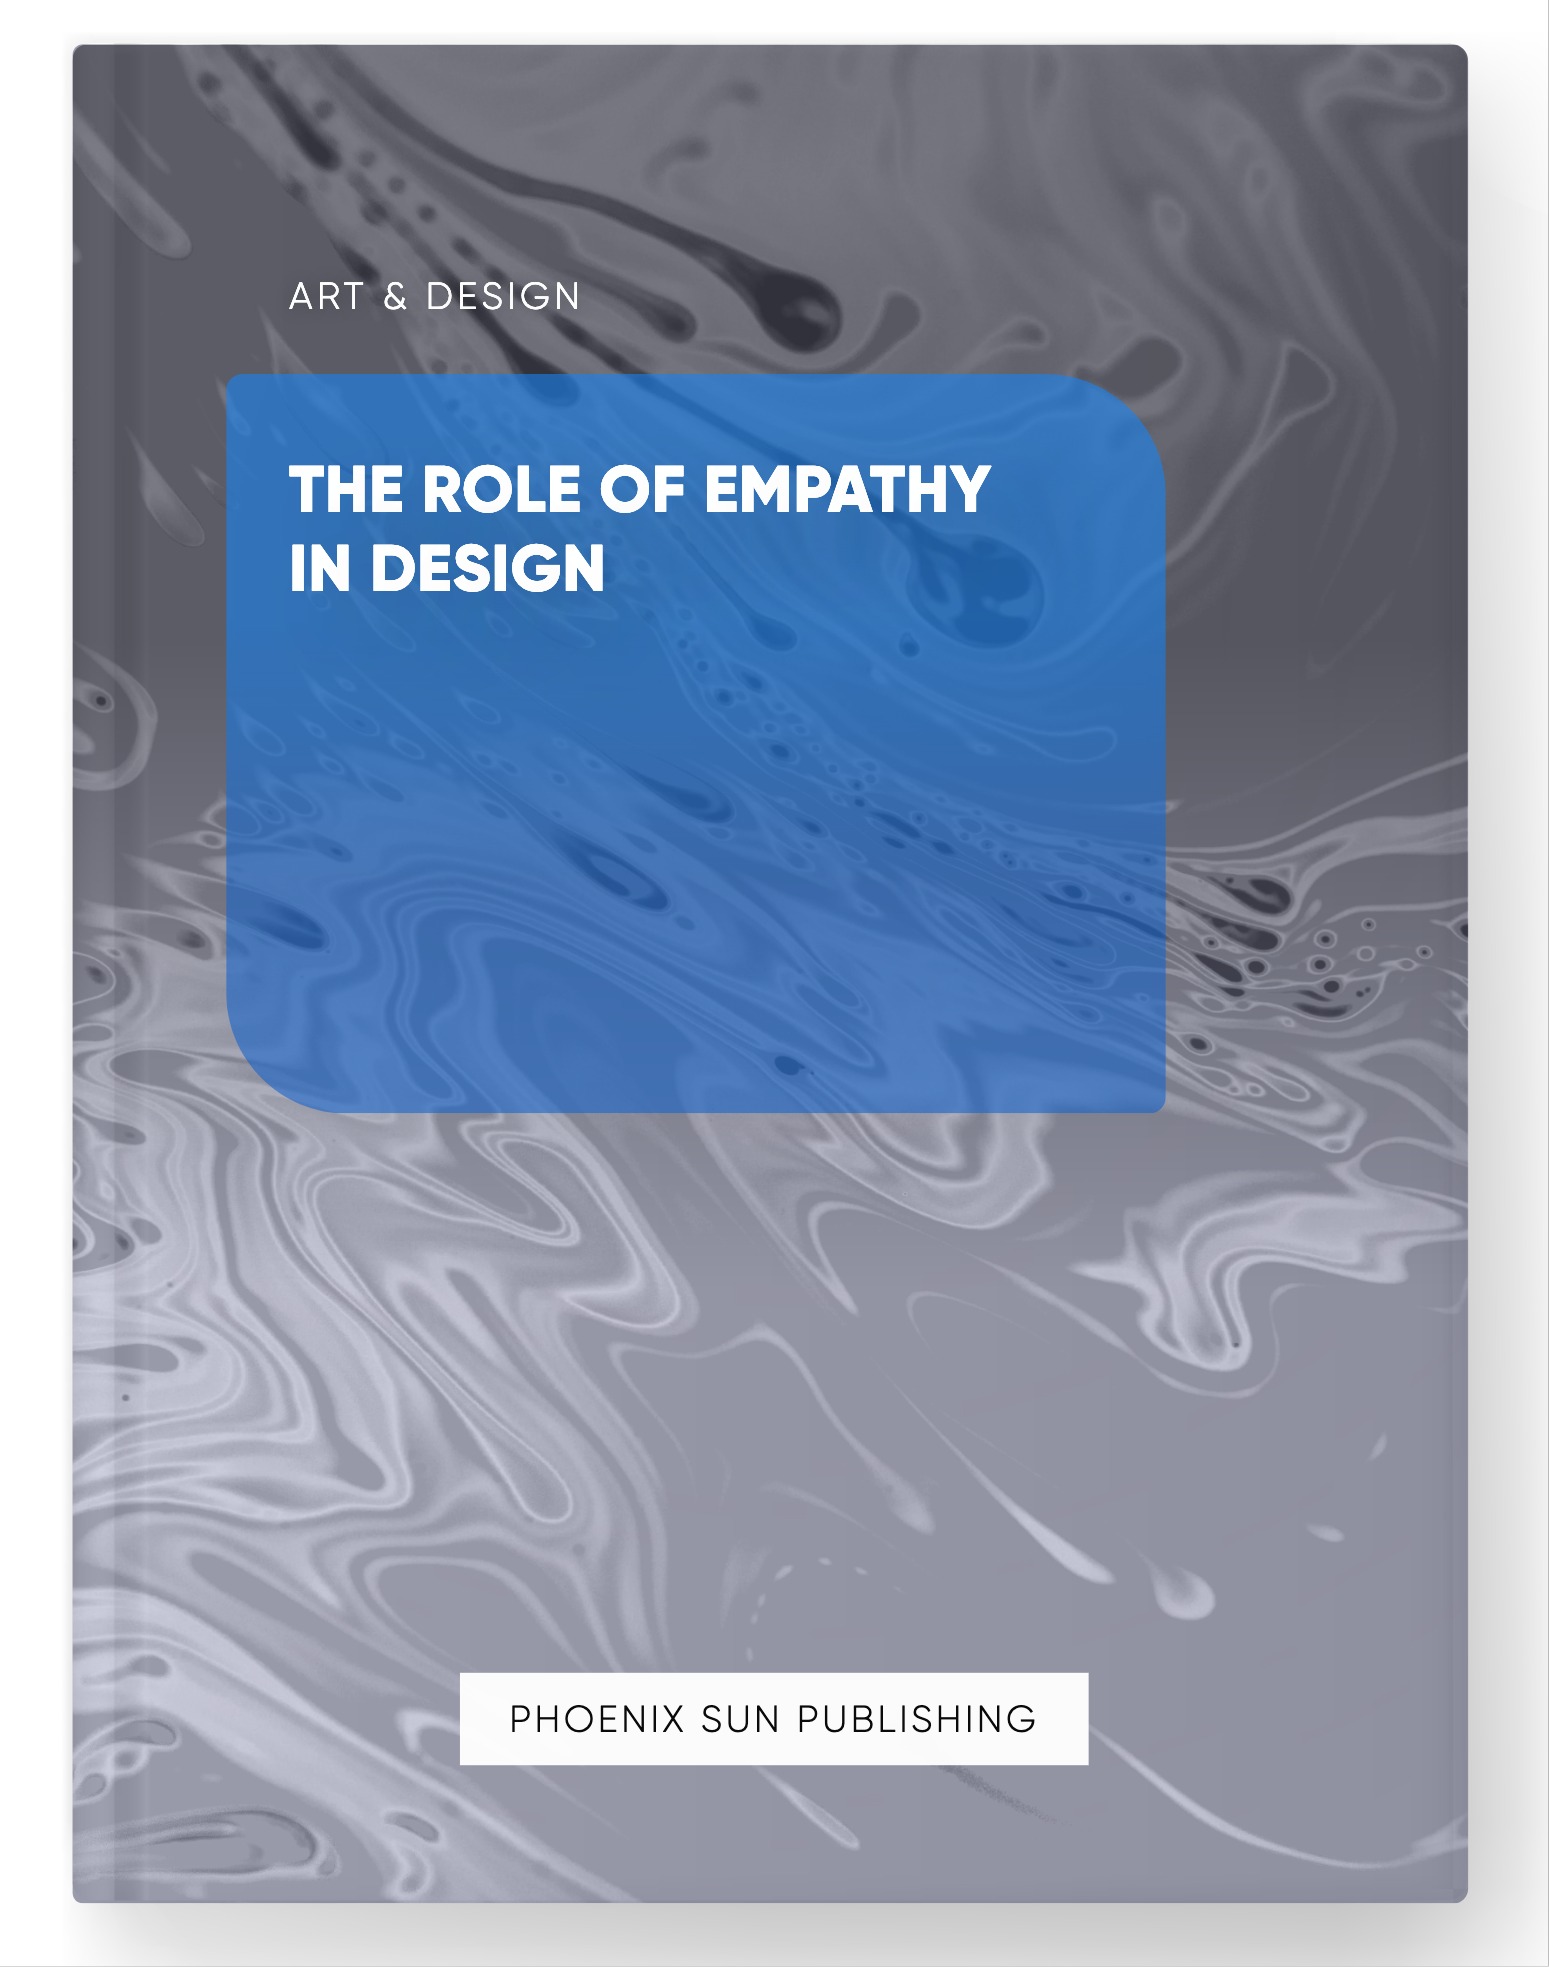 The Role of Empathy in Design